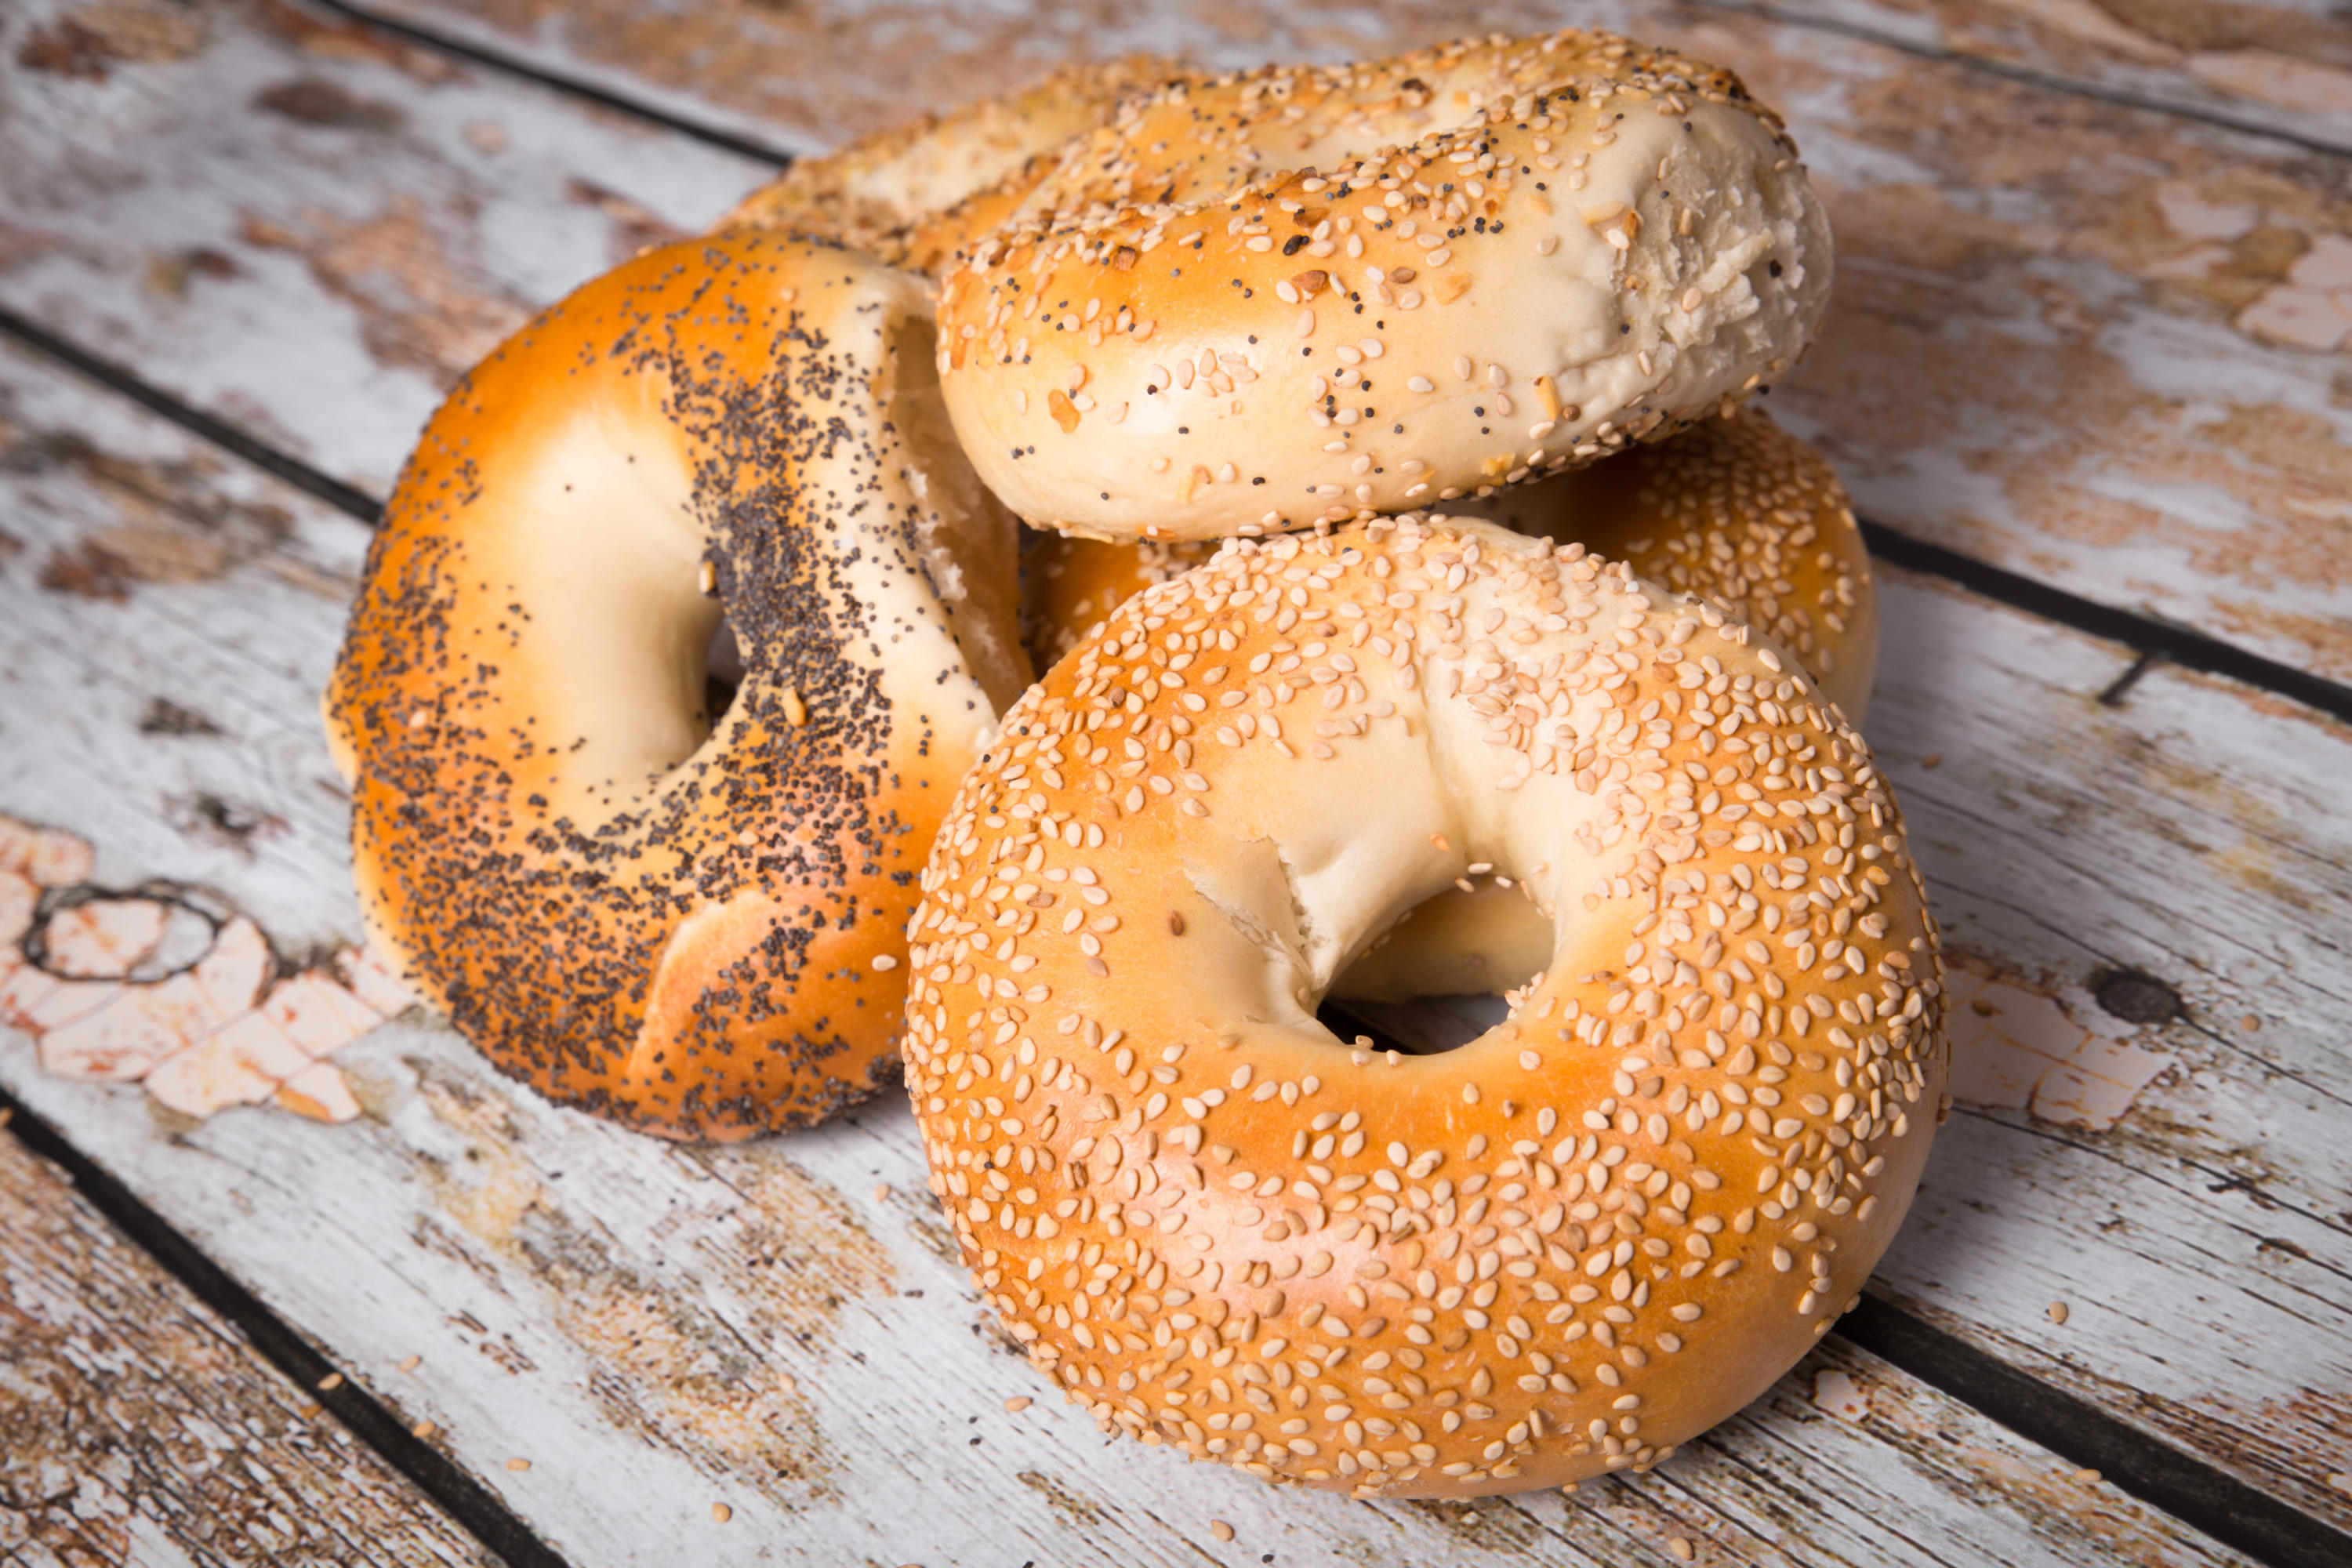 Old fashioned - Hand rolled, water-boiled bagels baked fresh daily.